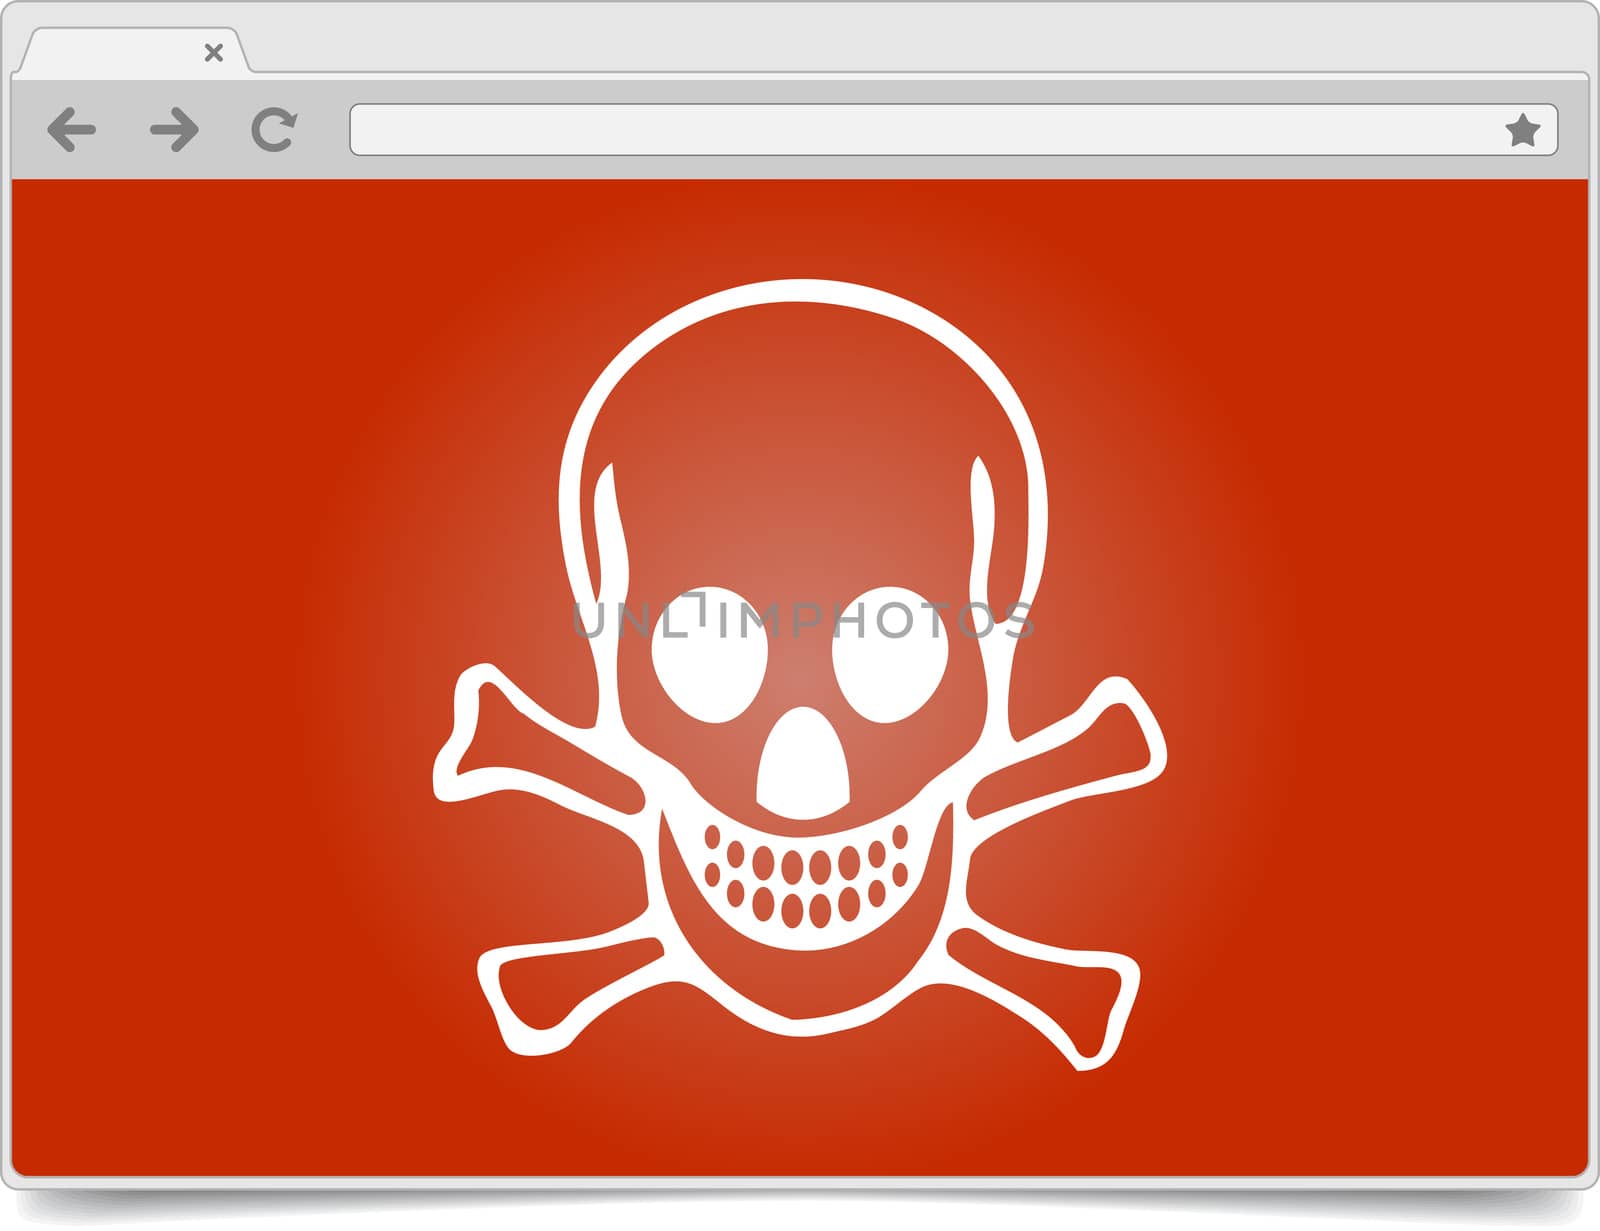 Simple opened browser window on white background with skull and shadow. Browser template / mockup.